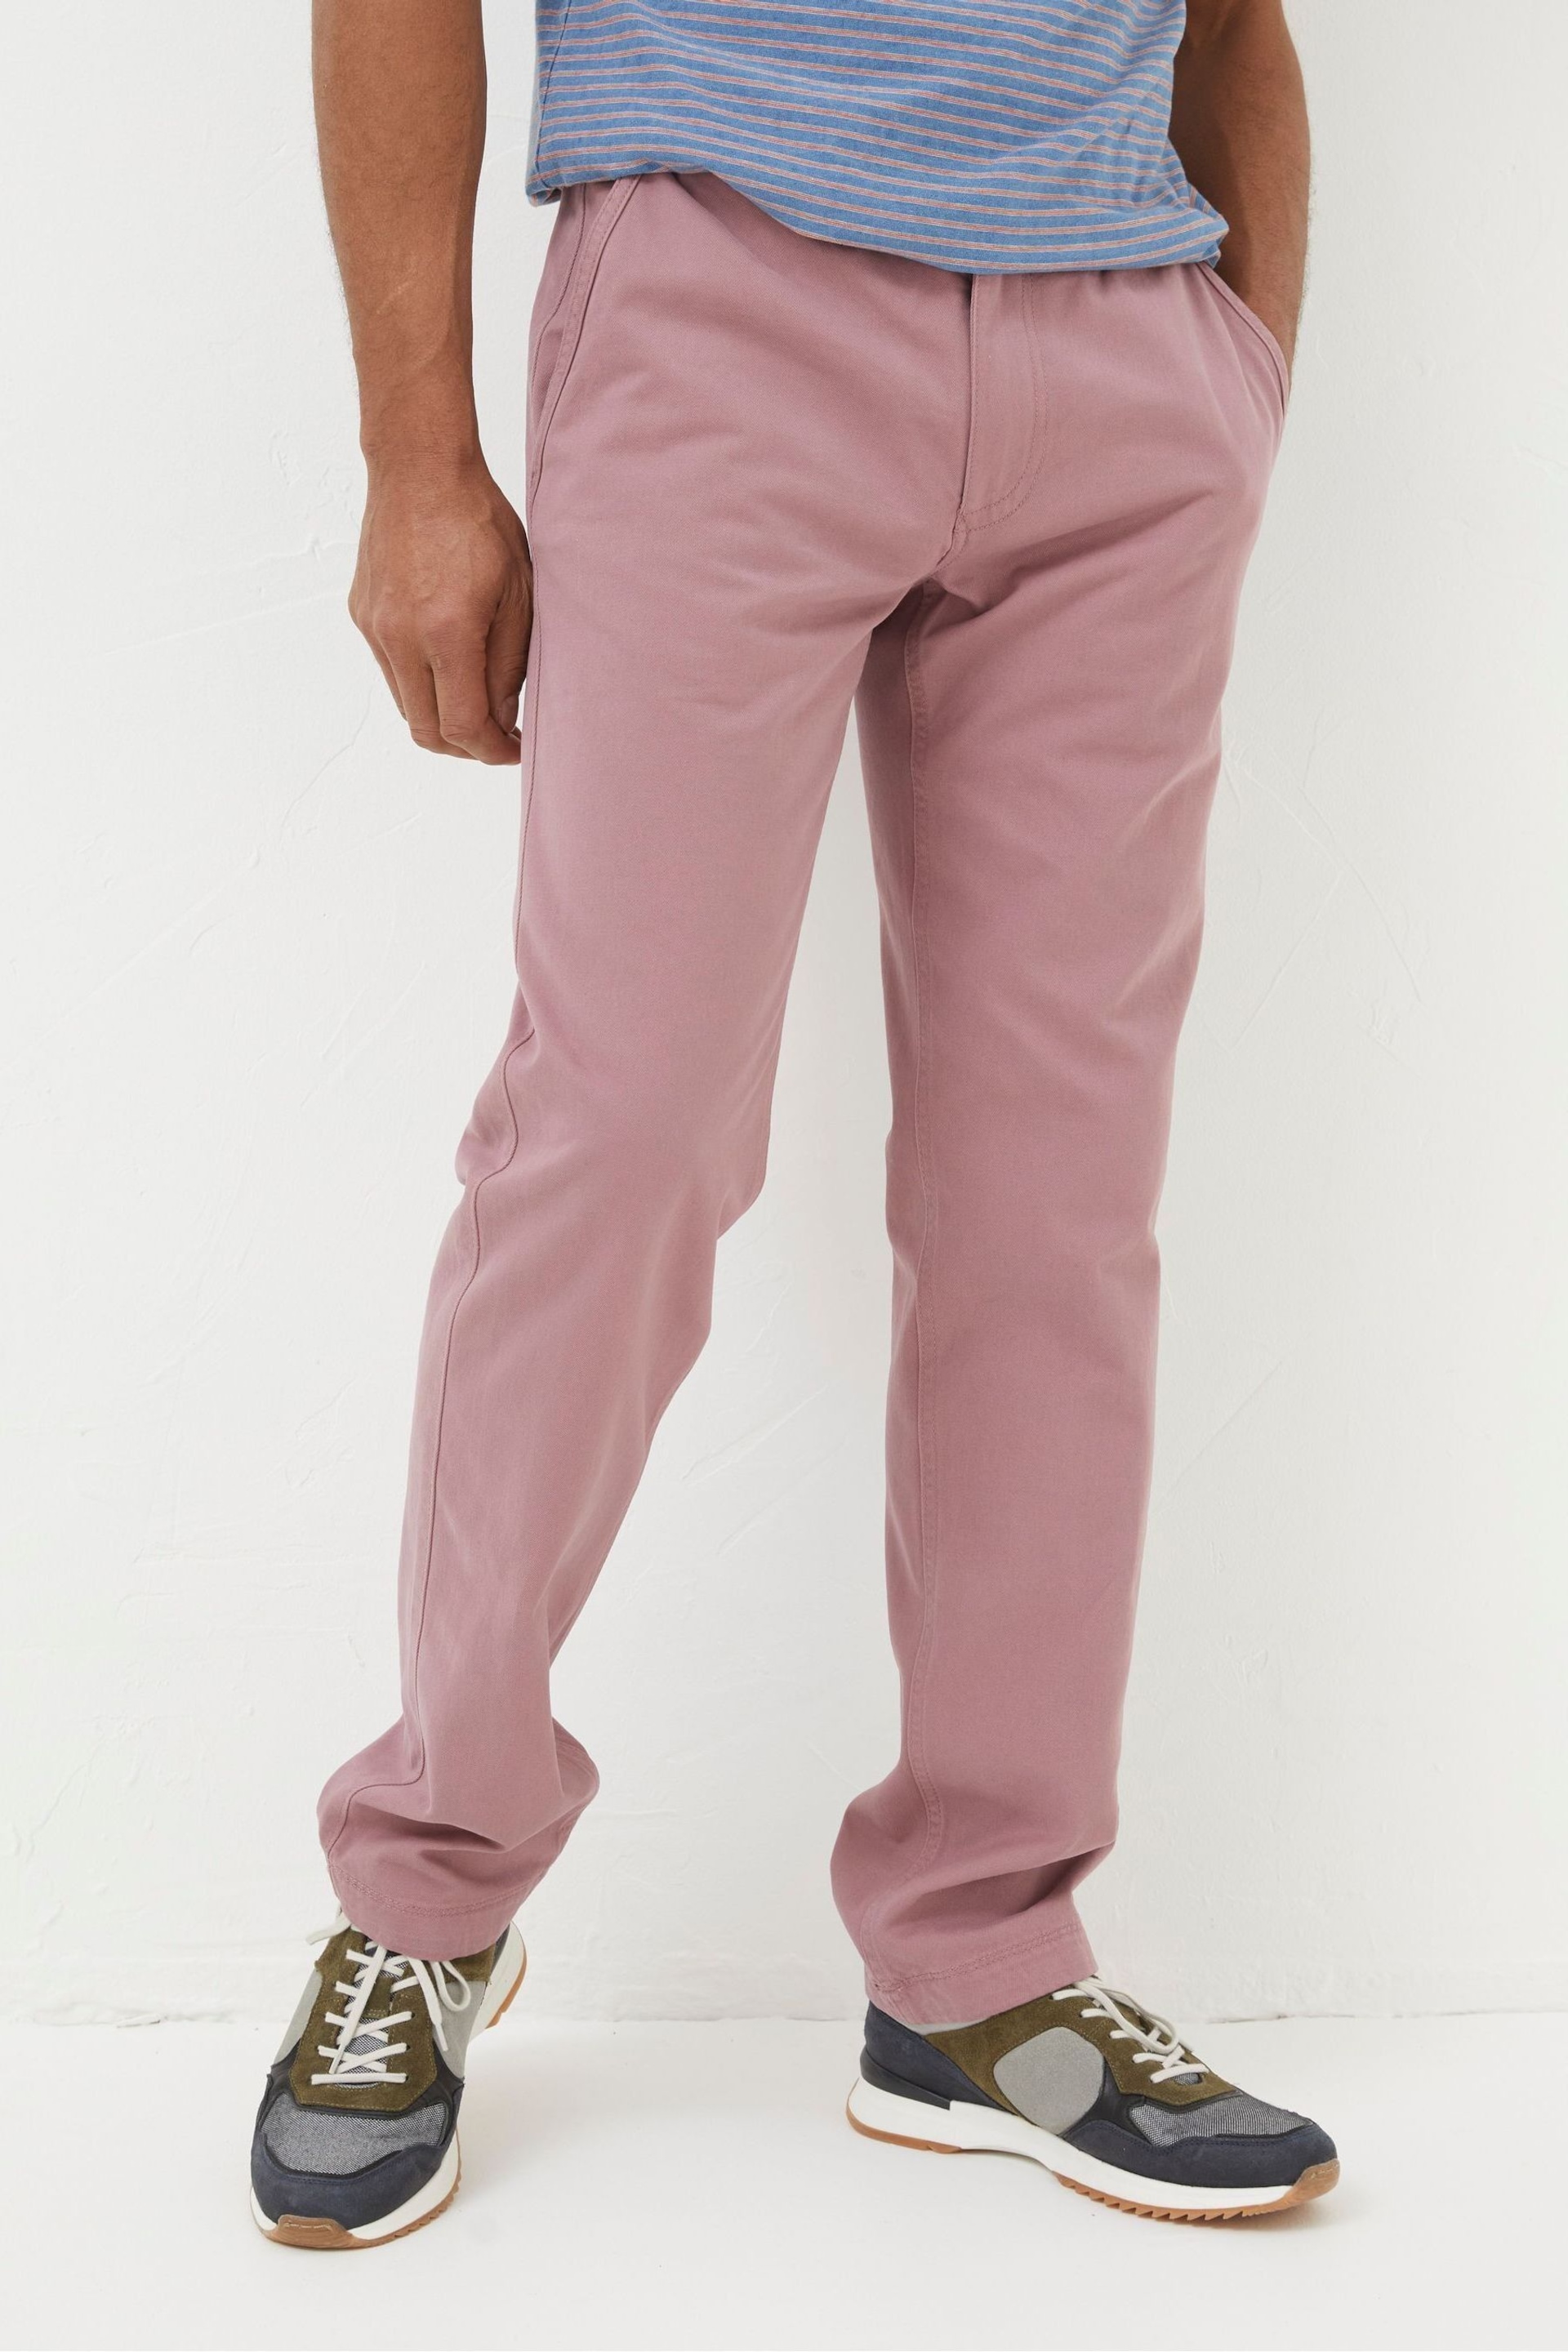 FatFace Pink Modern Coastal Chinos Trousers - Image 1 of 5